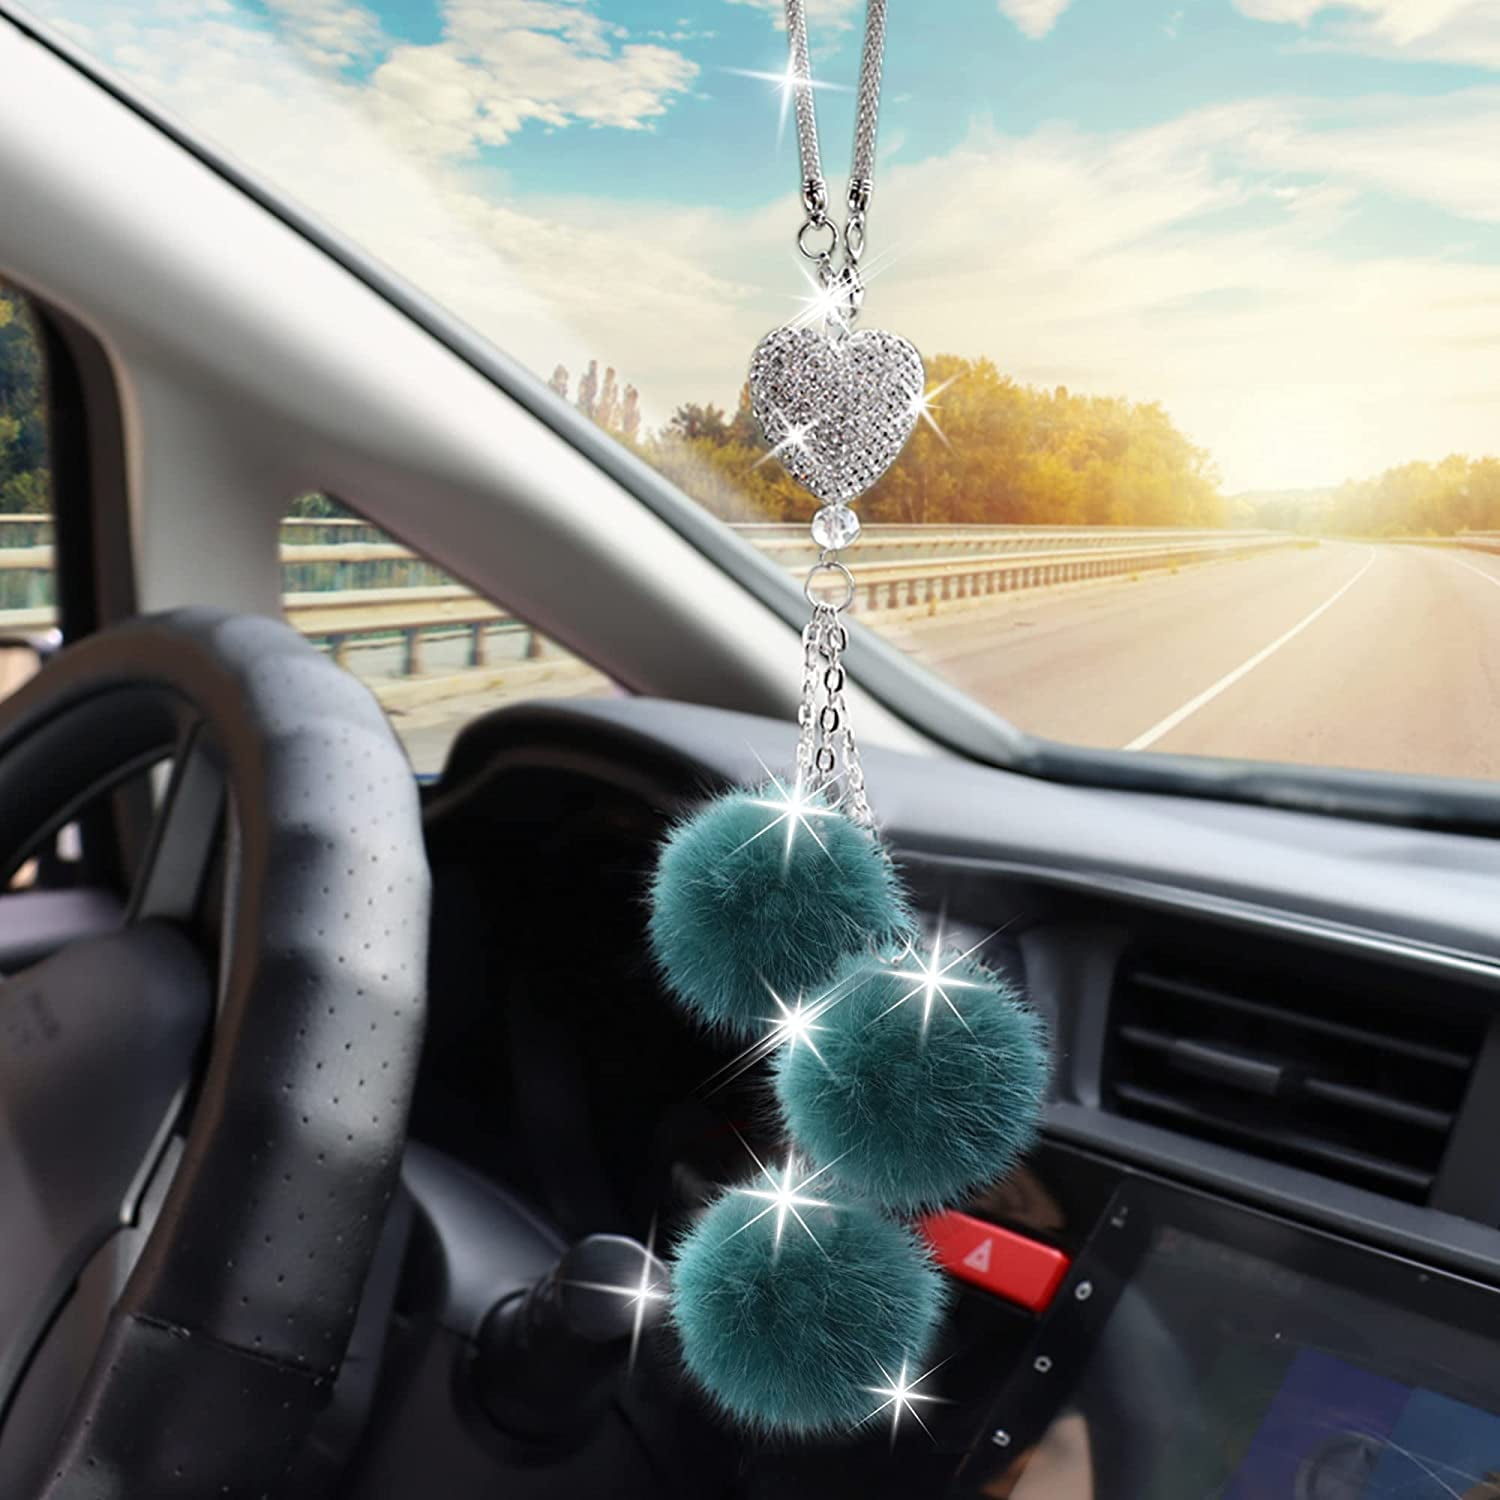 Car accessories for guys, Girly car, Car bling